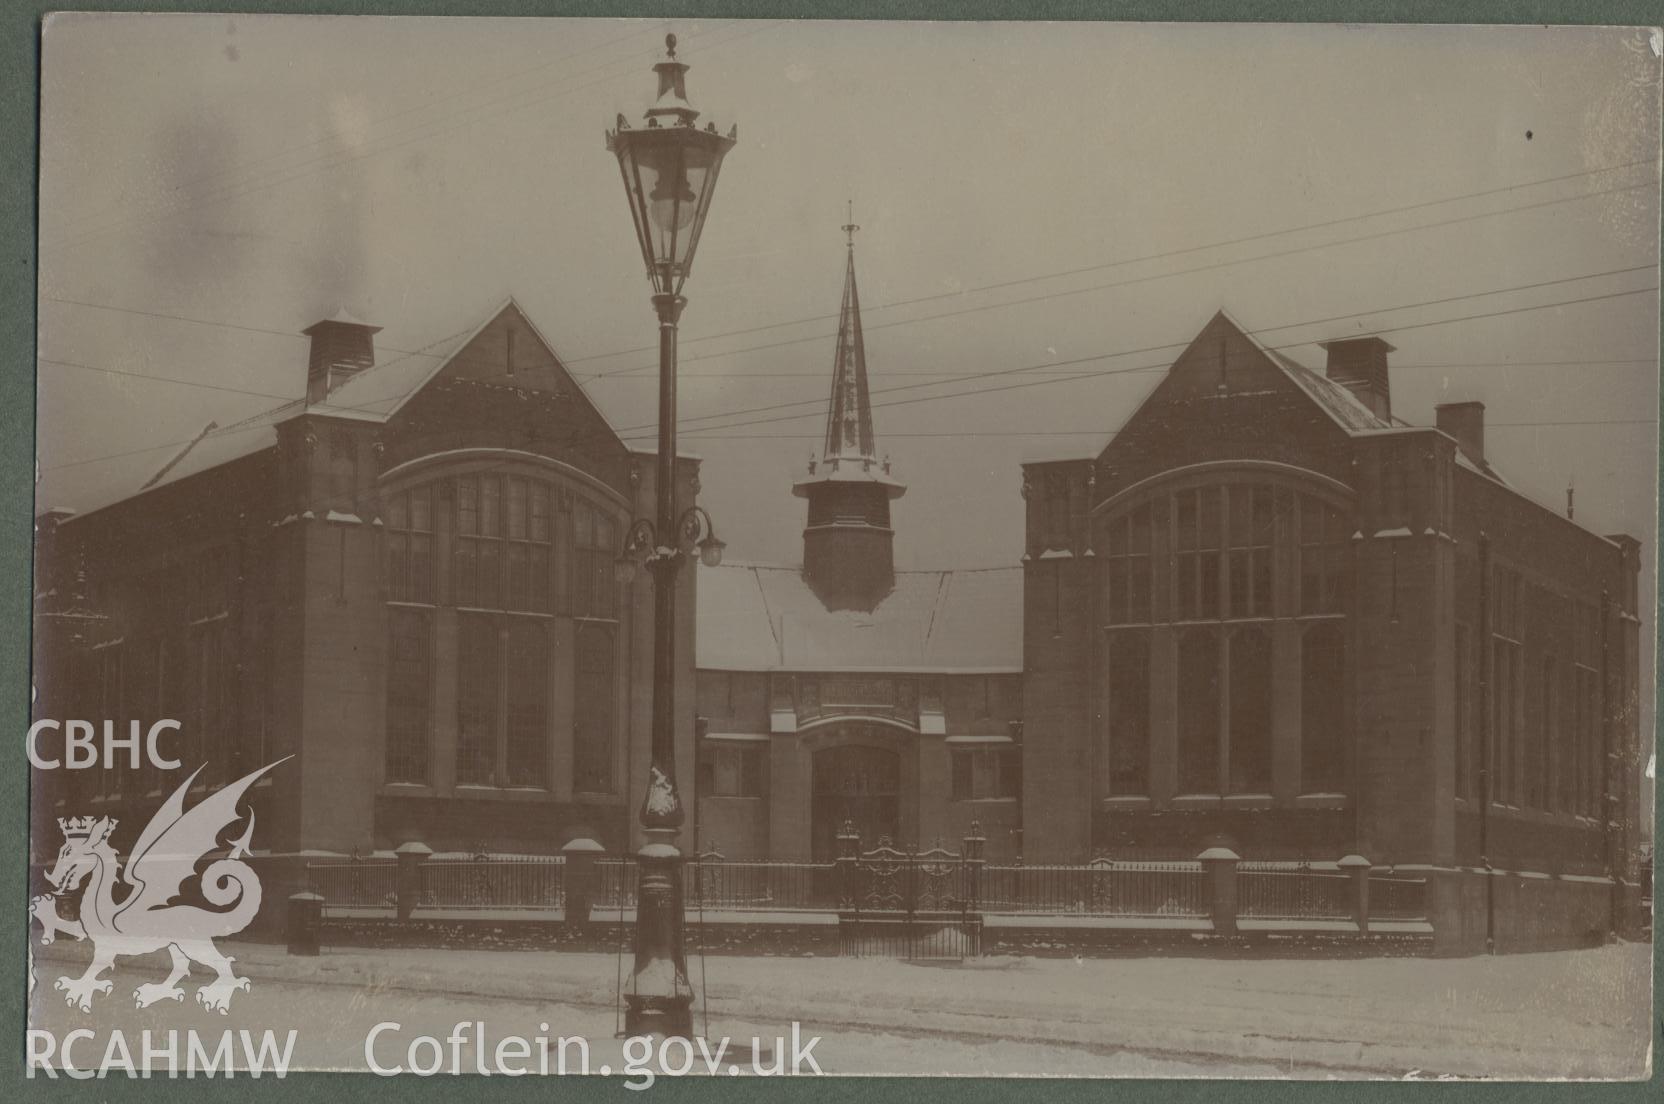 Black and white photograph showing the front exterior of Cathays Public Library, Cardiff, in the snow.